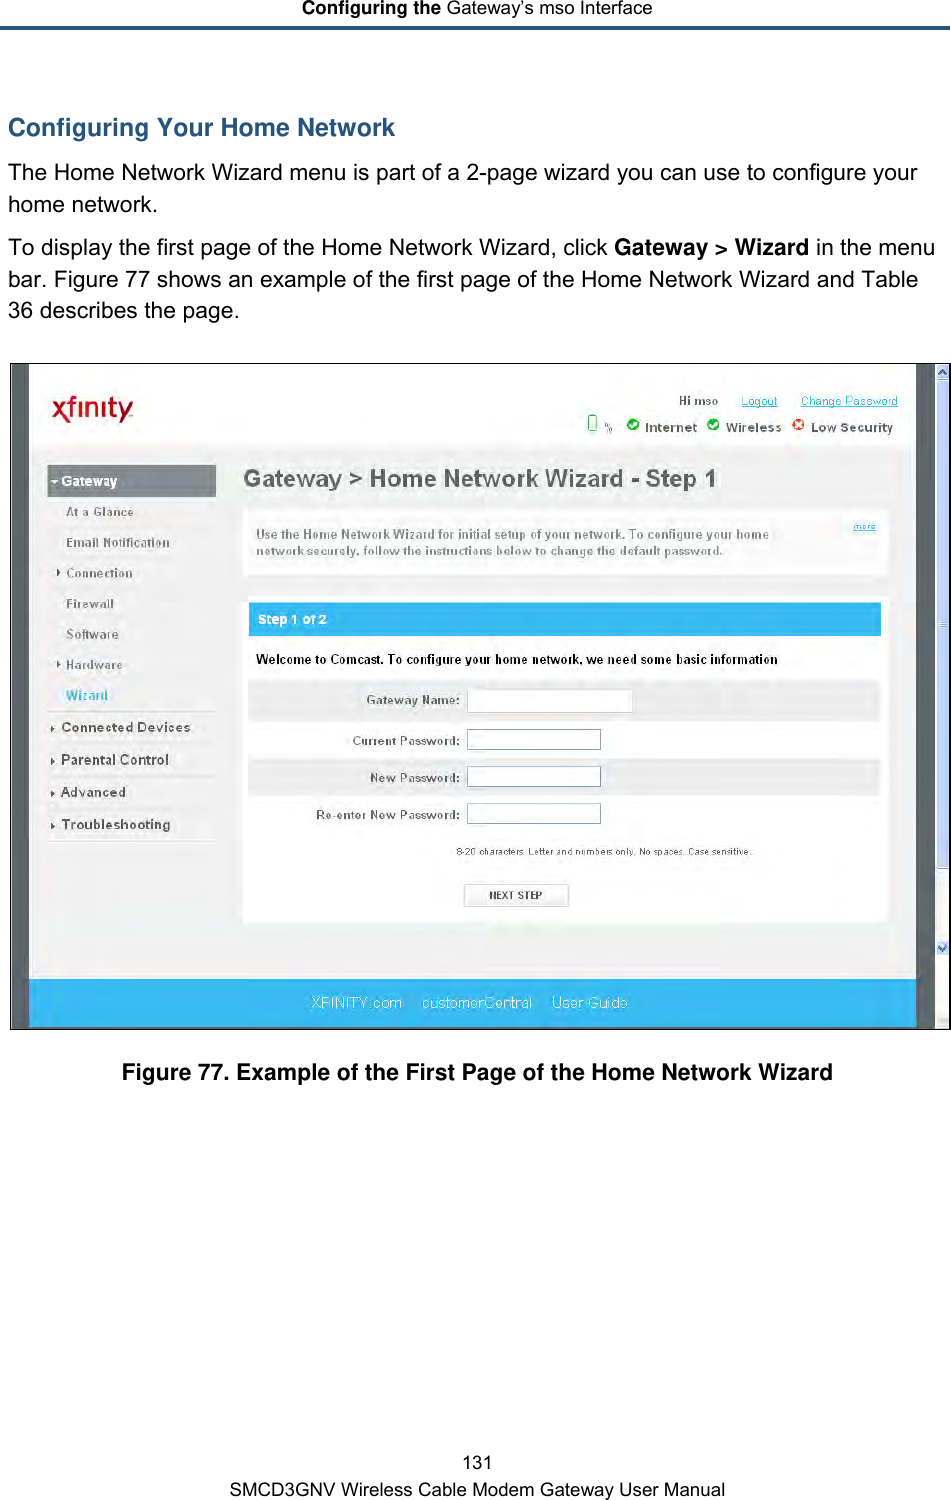 Configuring the Gateway’s mso Interface 131 SMCD3GNV Wireless Cable Modem Gateway User Manual Configuring Your Home Network The Home Network Wizard menu is part of a 2-page wizard you can use to configure your home network. To display the first page of the Home Network Wizard, click Gateway &gt; Wizard in the menu bar. Figure 77 shows an example of the first page of the Home Network Wizard and Table 36 describes the page.  Figure 77. Example of the First Page of the Home Network Wizard 